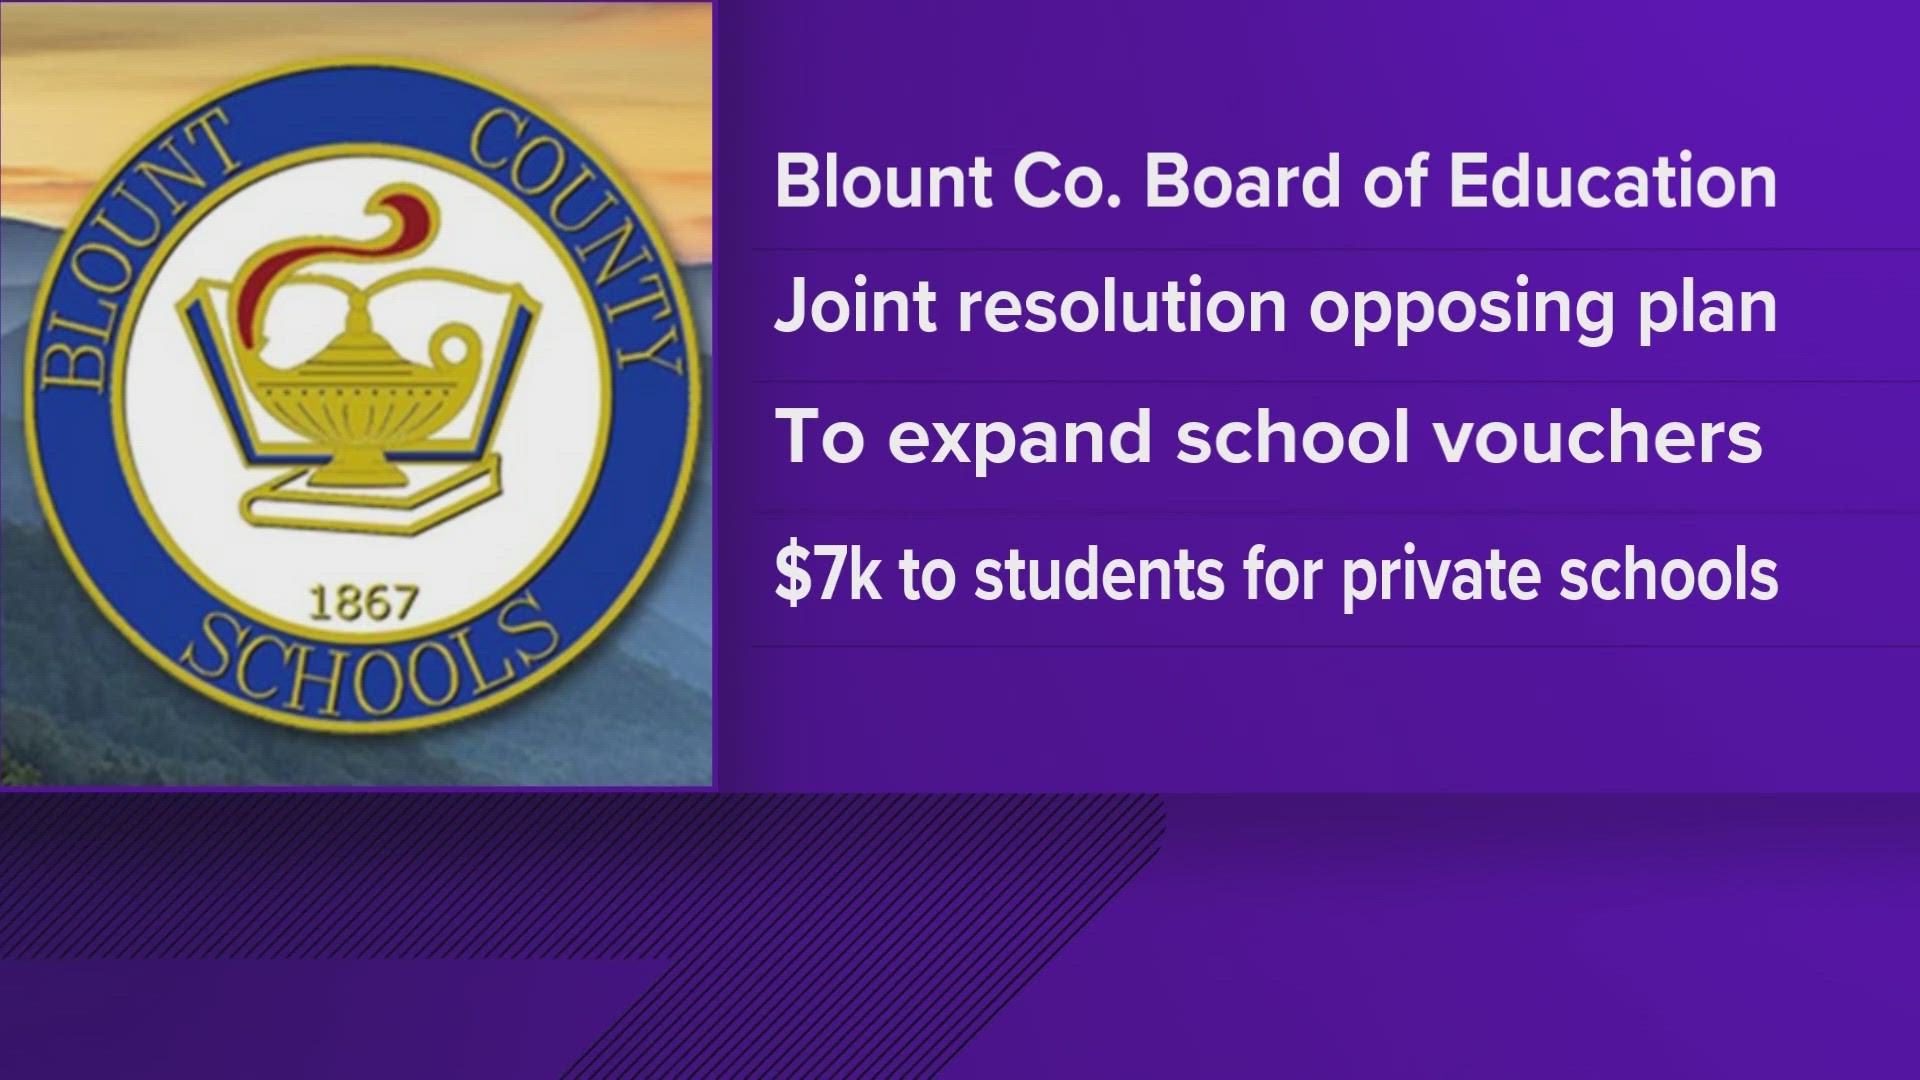 A resolution opposing the controversial measure is on the agenda for Thursday's Board of Education meeting.